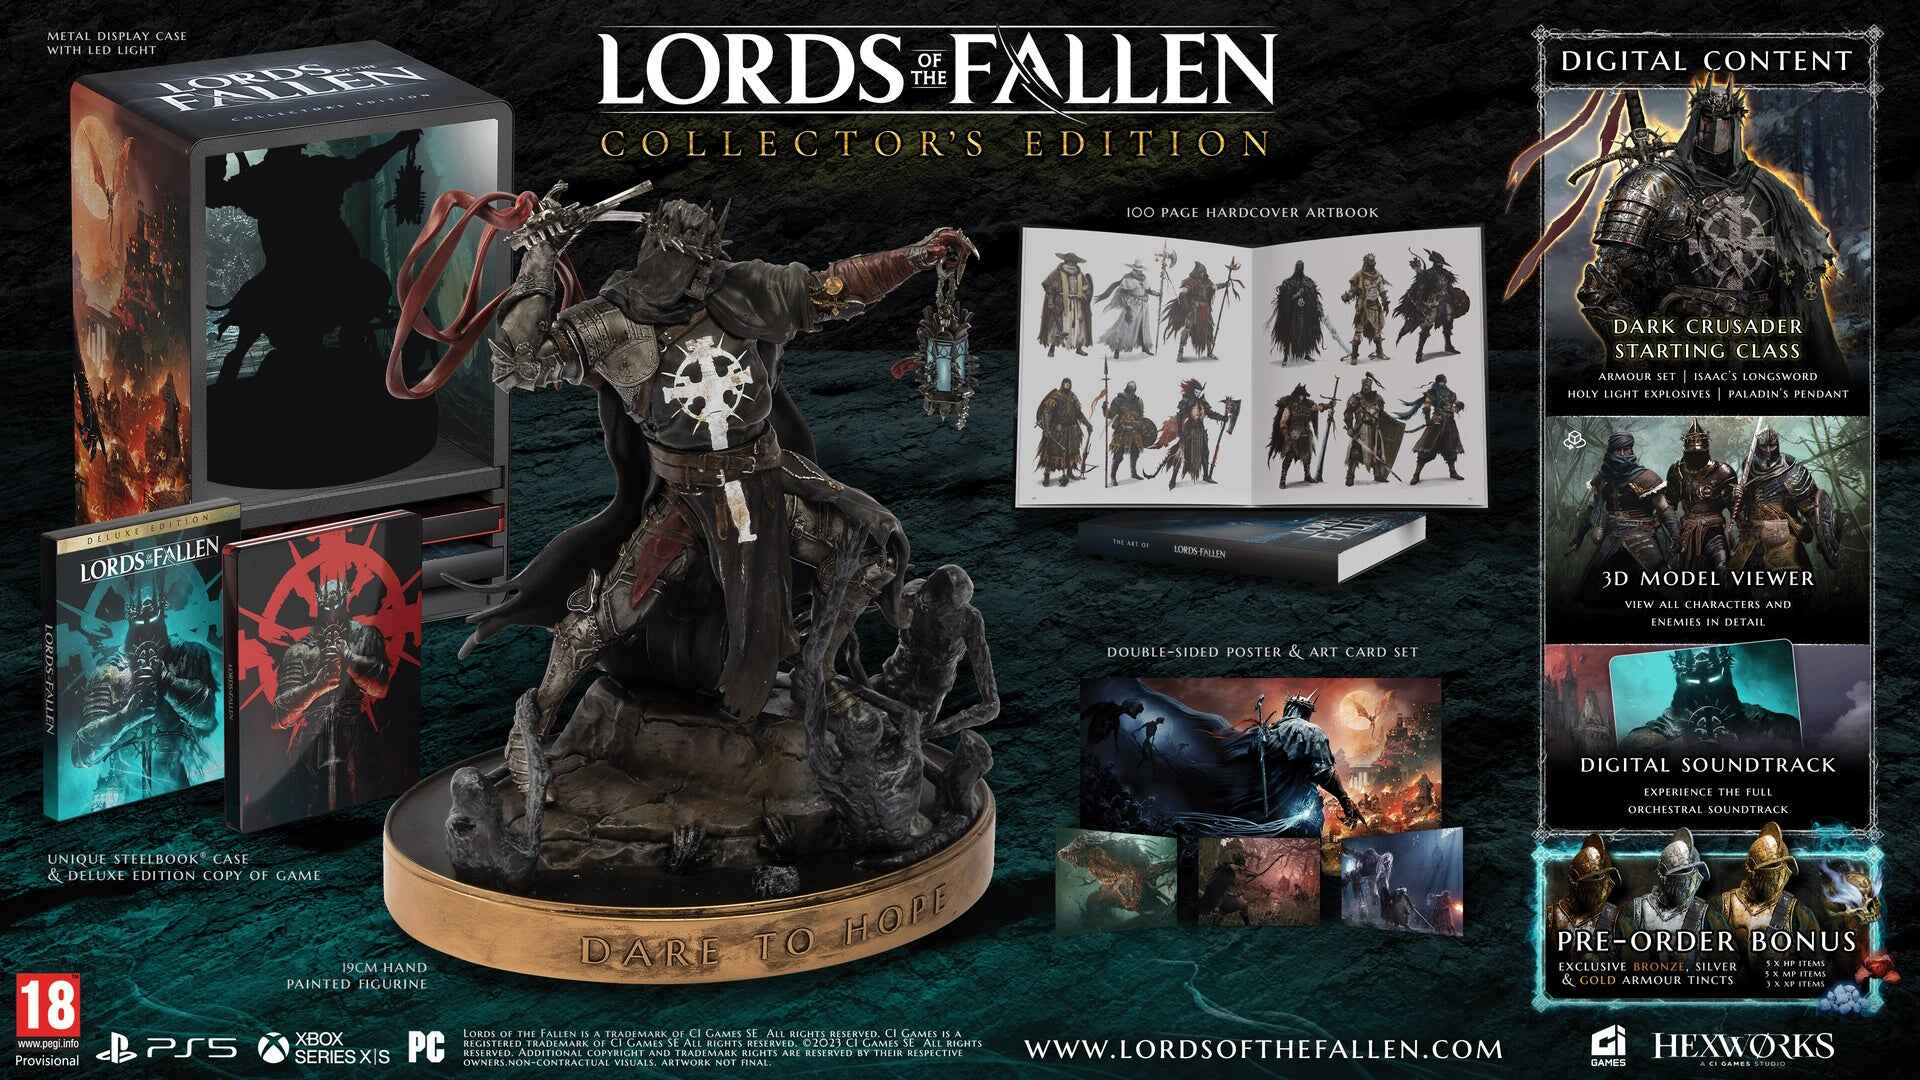 Buy Lords of the Fallen Deluxe Edition Steam